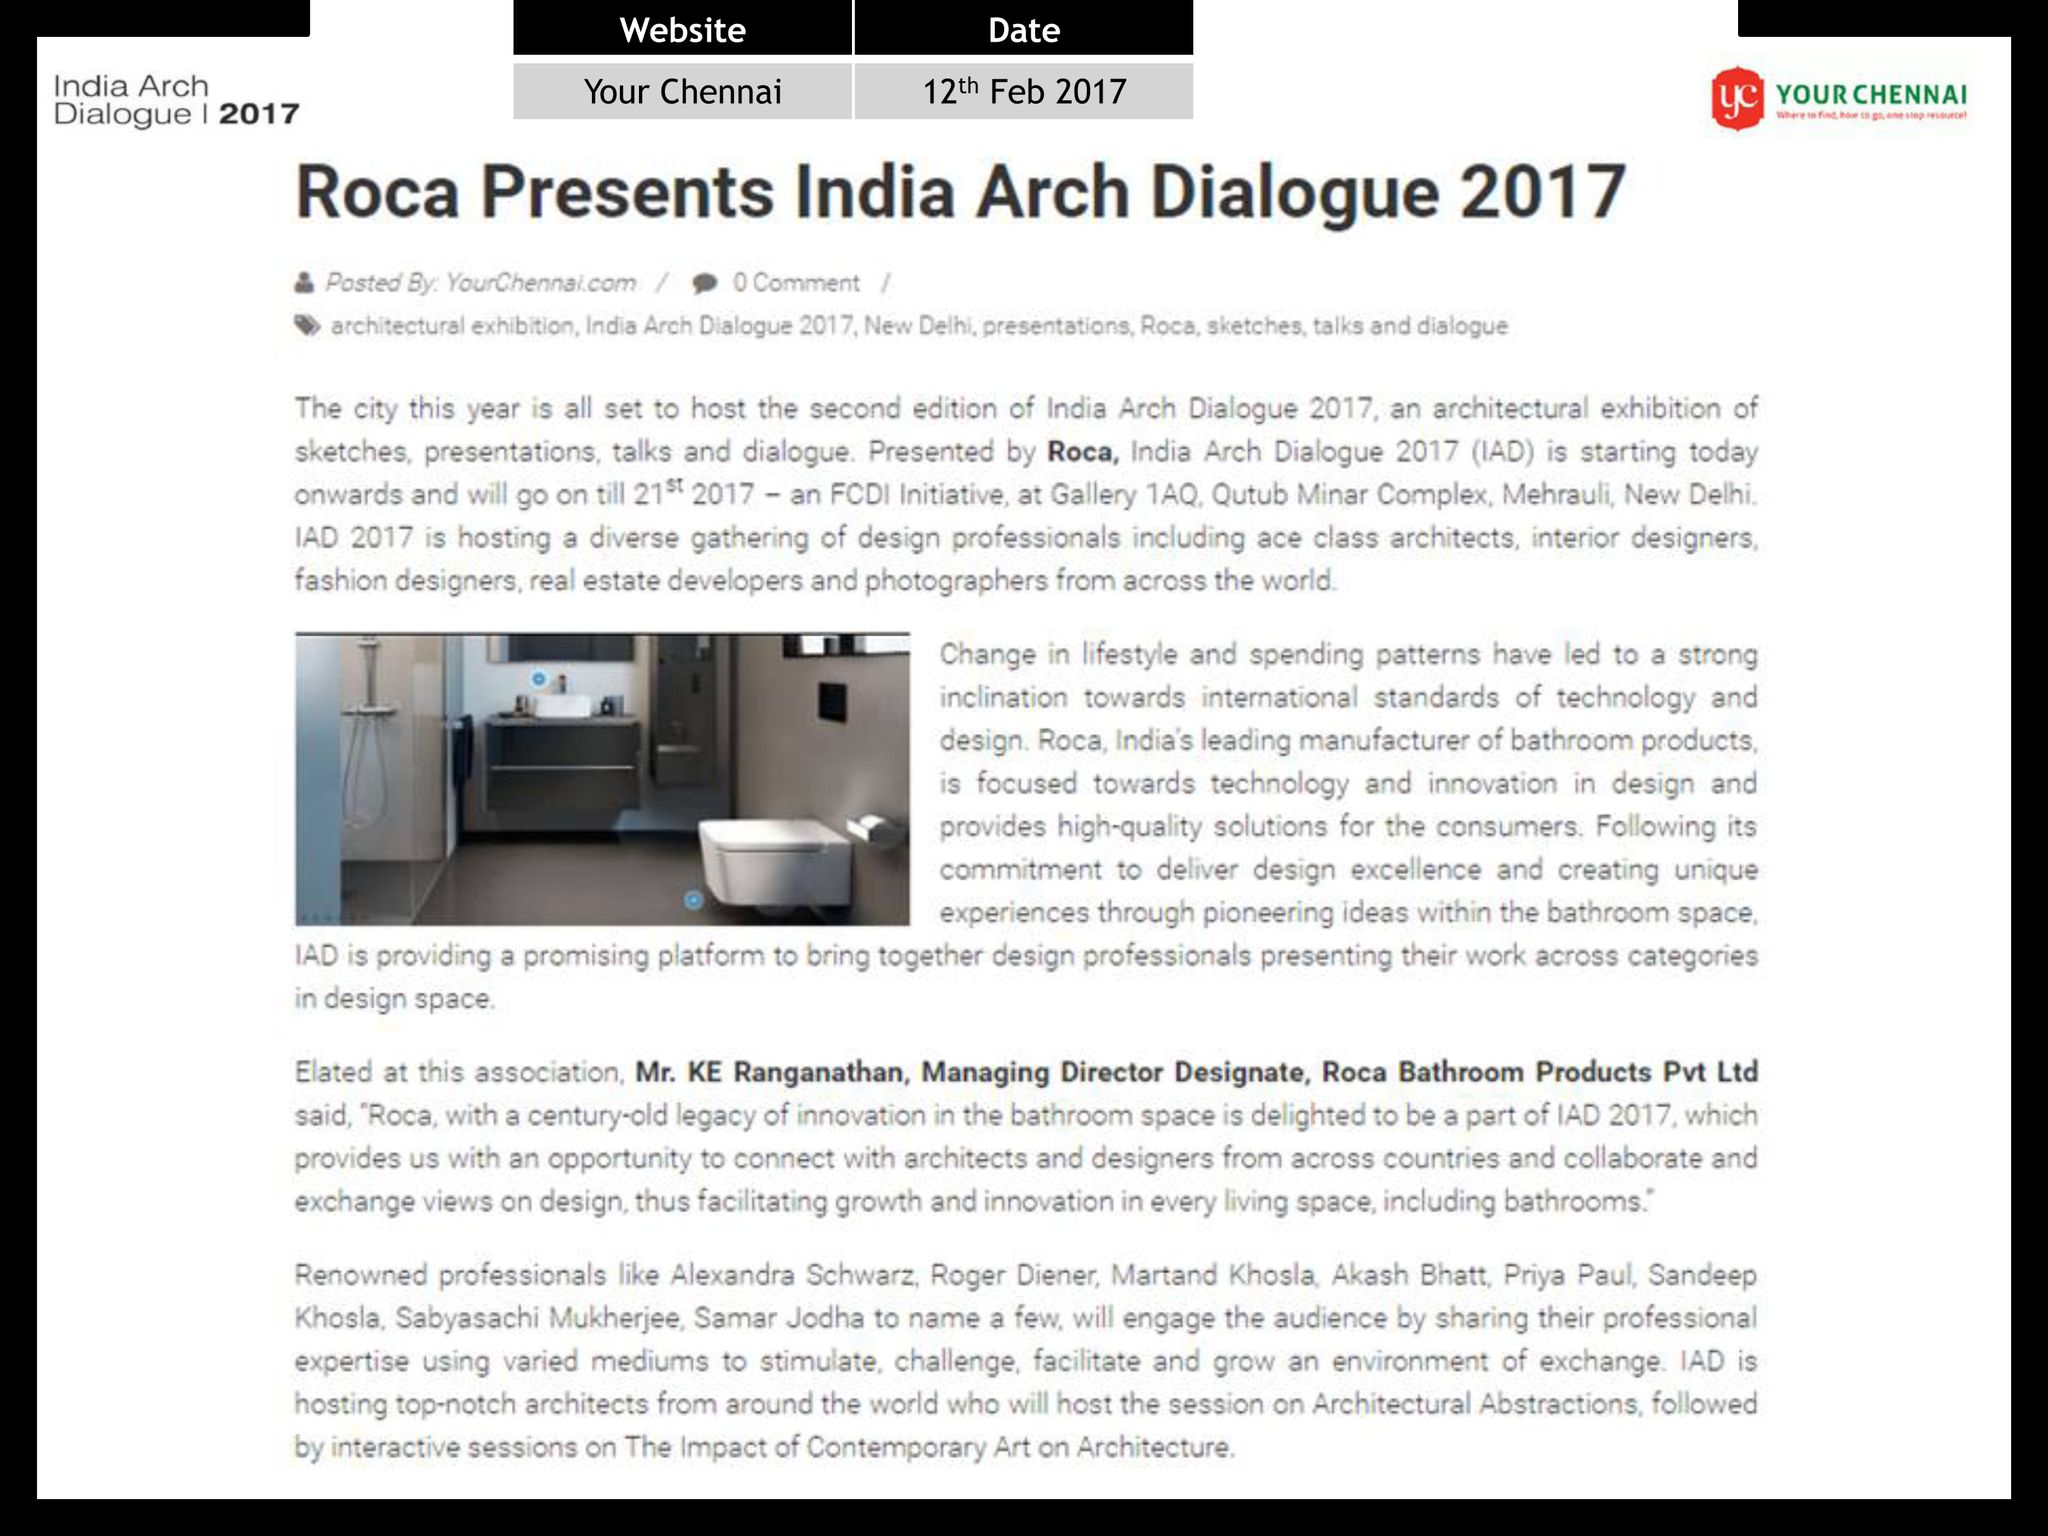 India Today Coverage of India Arch Dialogue 2017